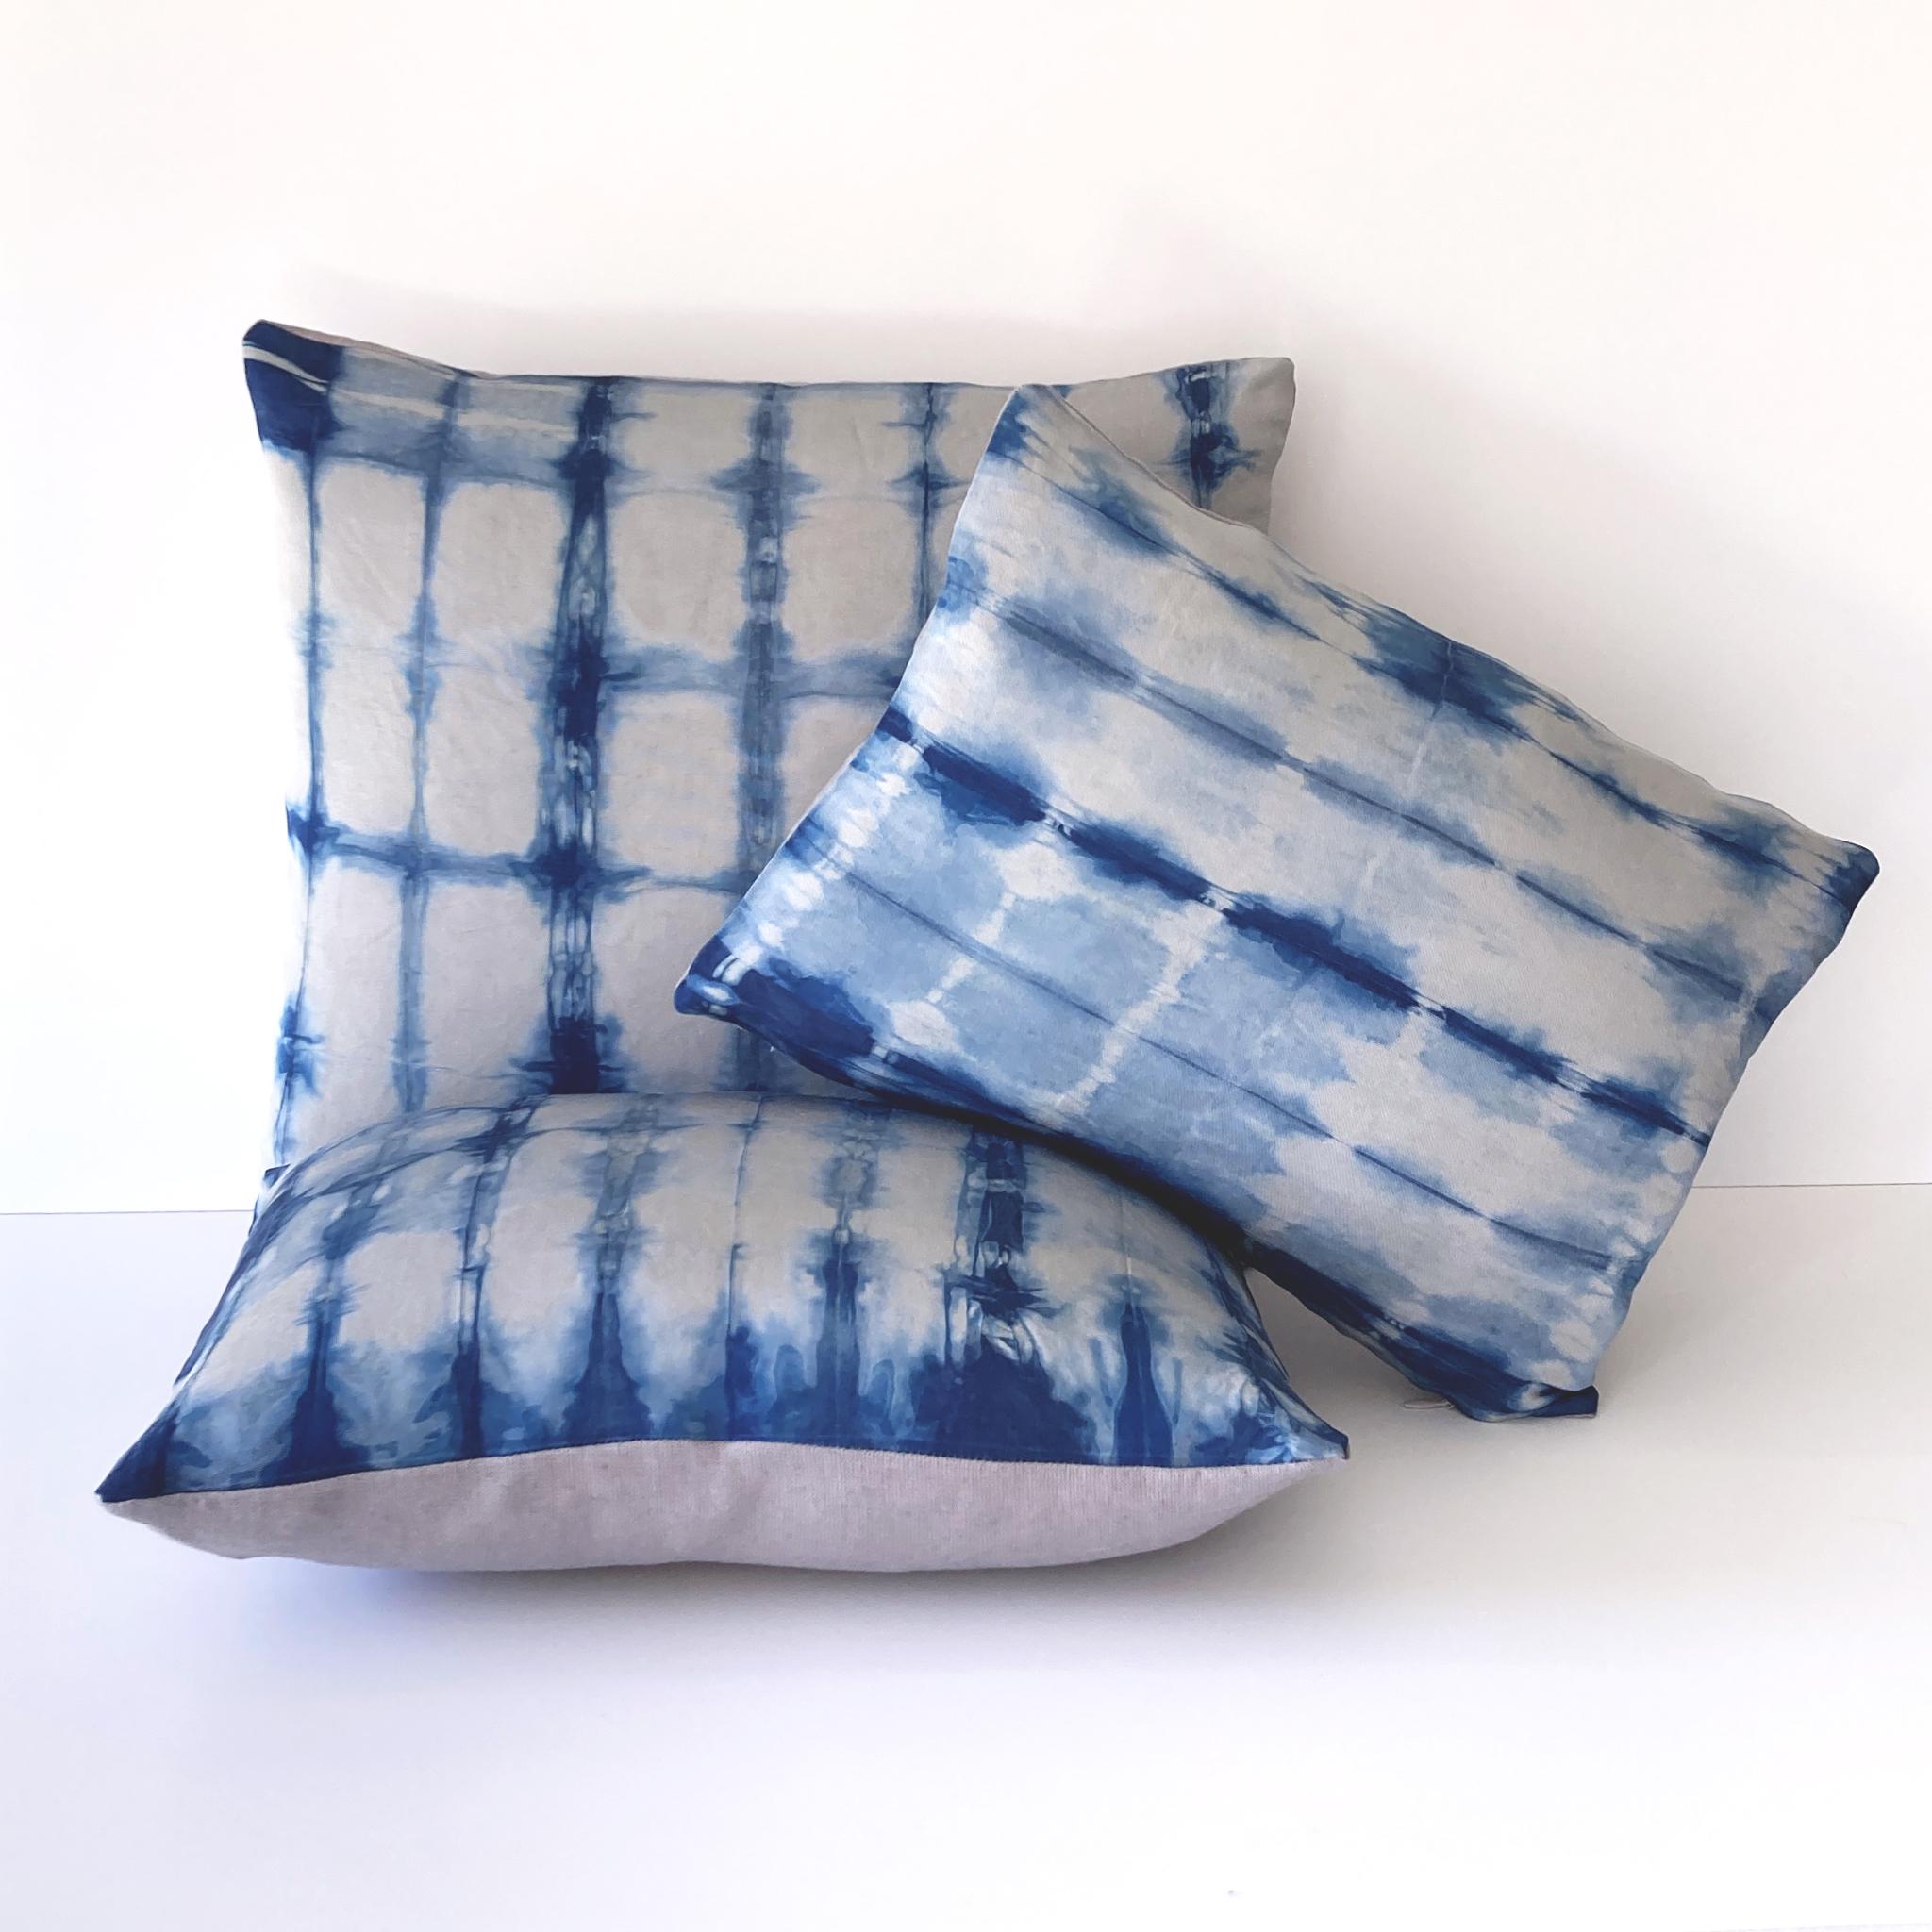 Silver gray silk faille pillow dyed with indigo in Grid pattern with gray linen backing. Hand-dyed and sewn in New York City, down pillow insert made locally in NYC. Pillow measures 18 x 18 inches. Each silk pillow is hand made and one of a